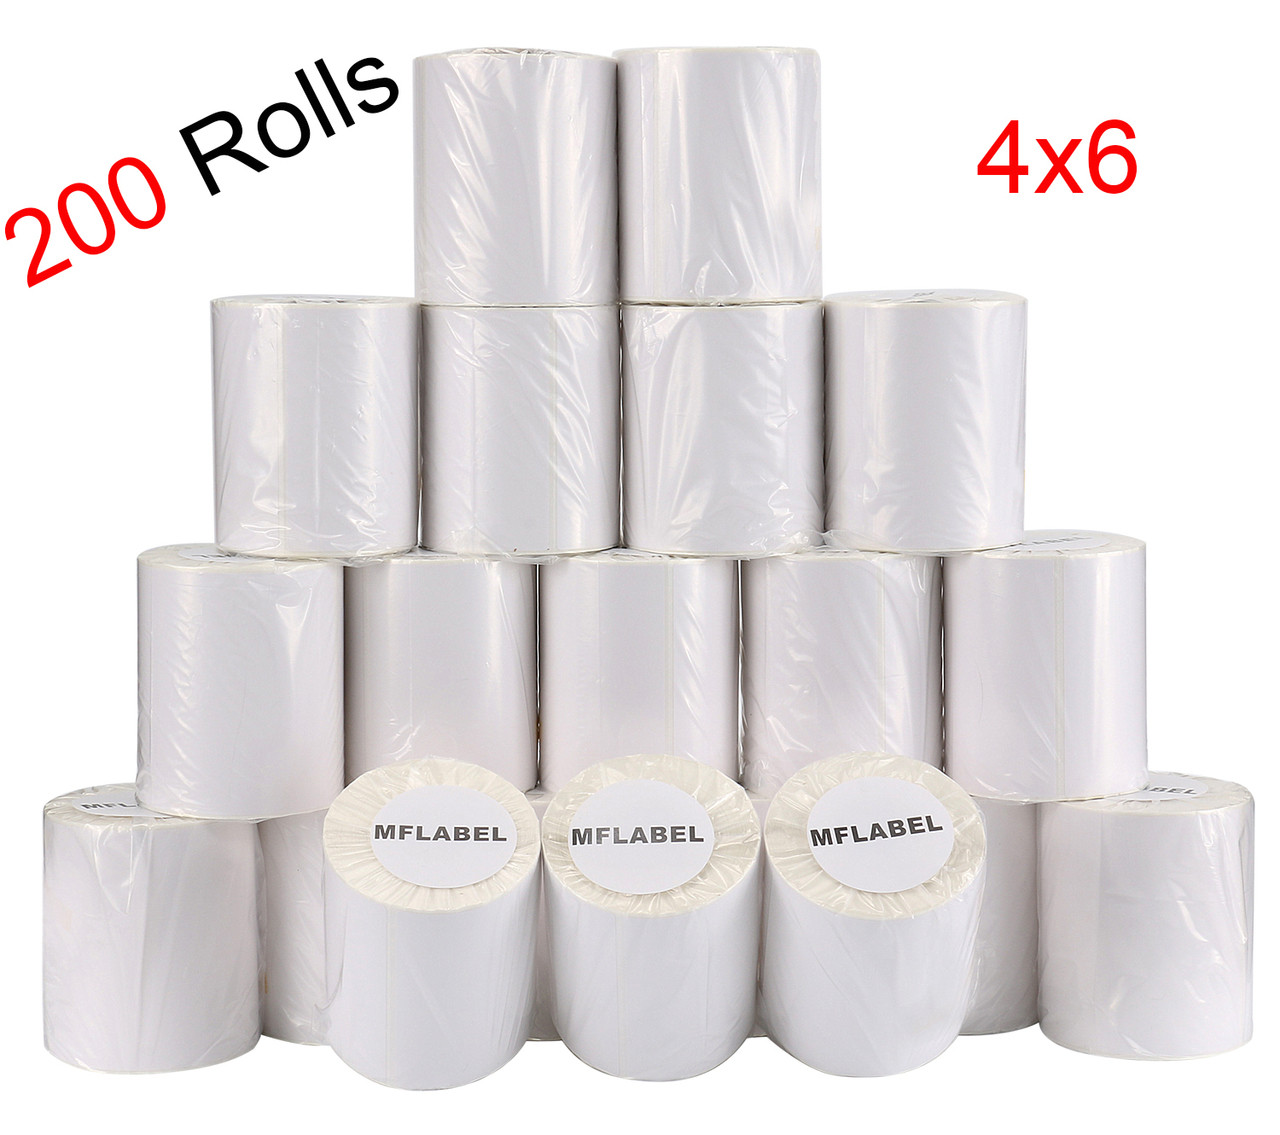 4 Roll 250/Roll 4x6 Direct Thermal Shipping Labels For Zebra 2844 Eltron ZP-450 